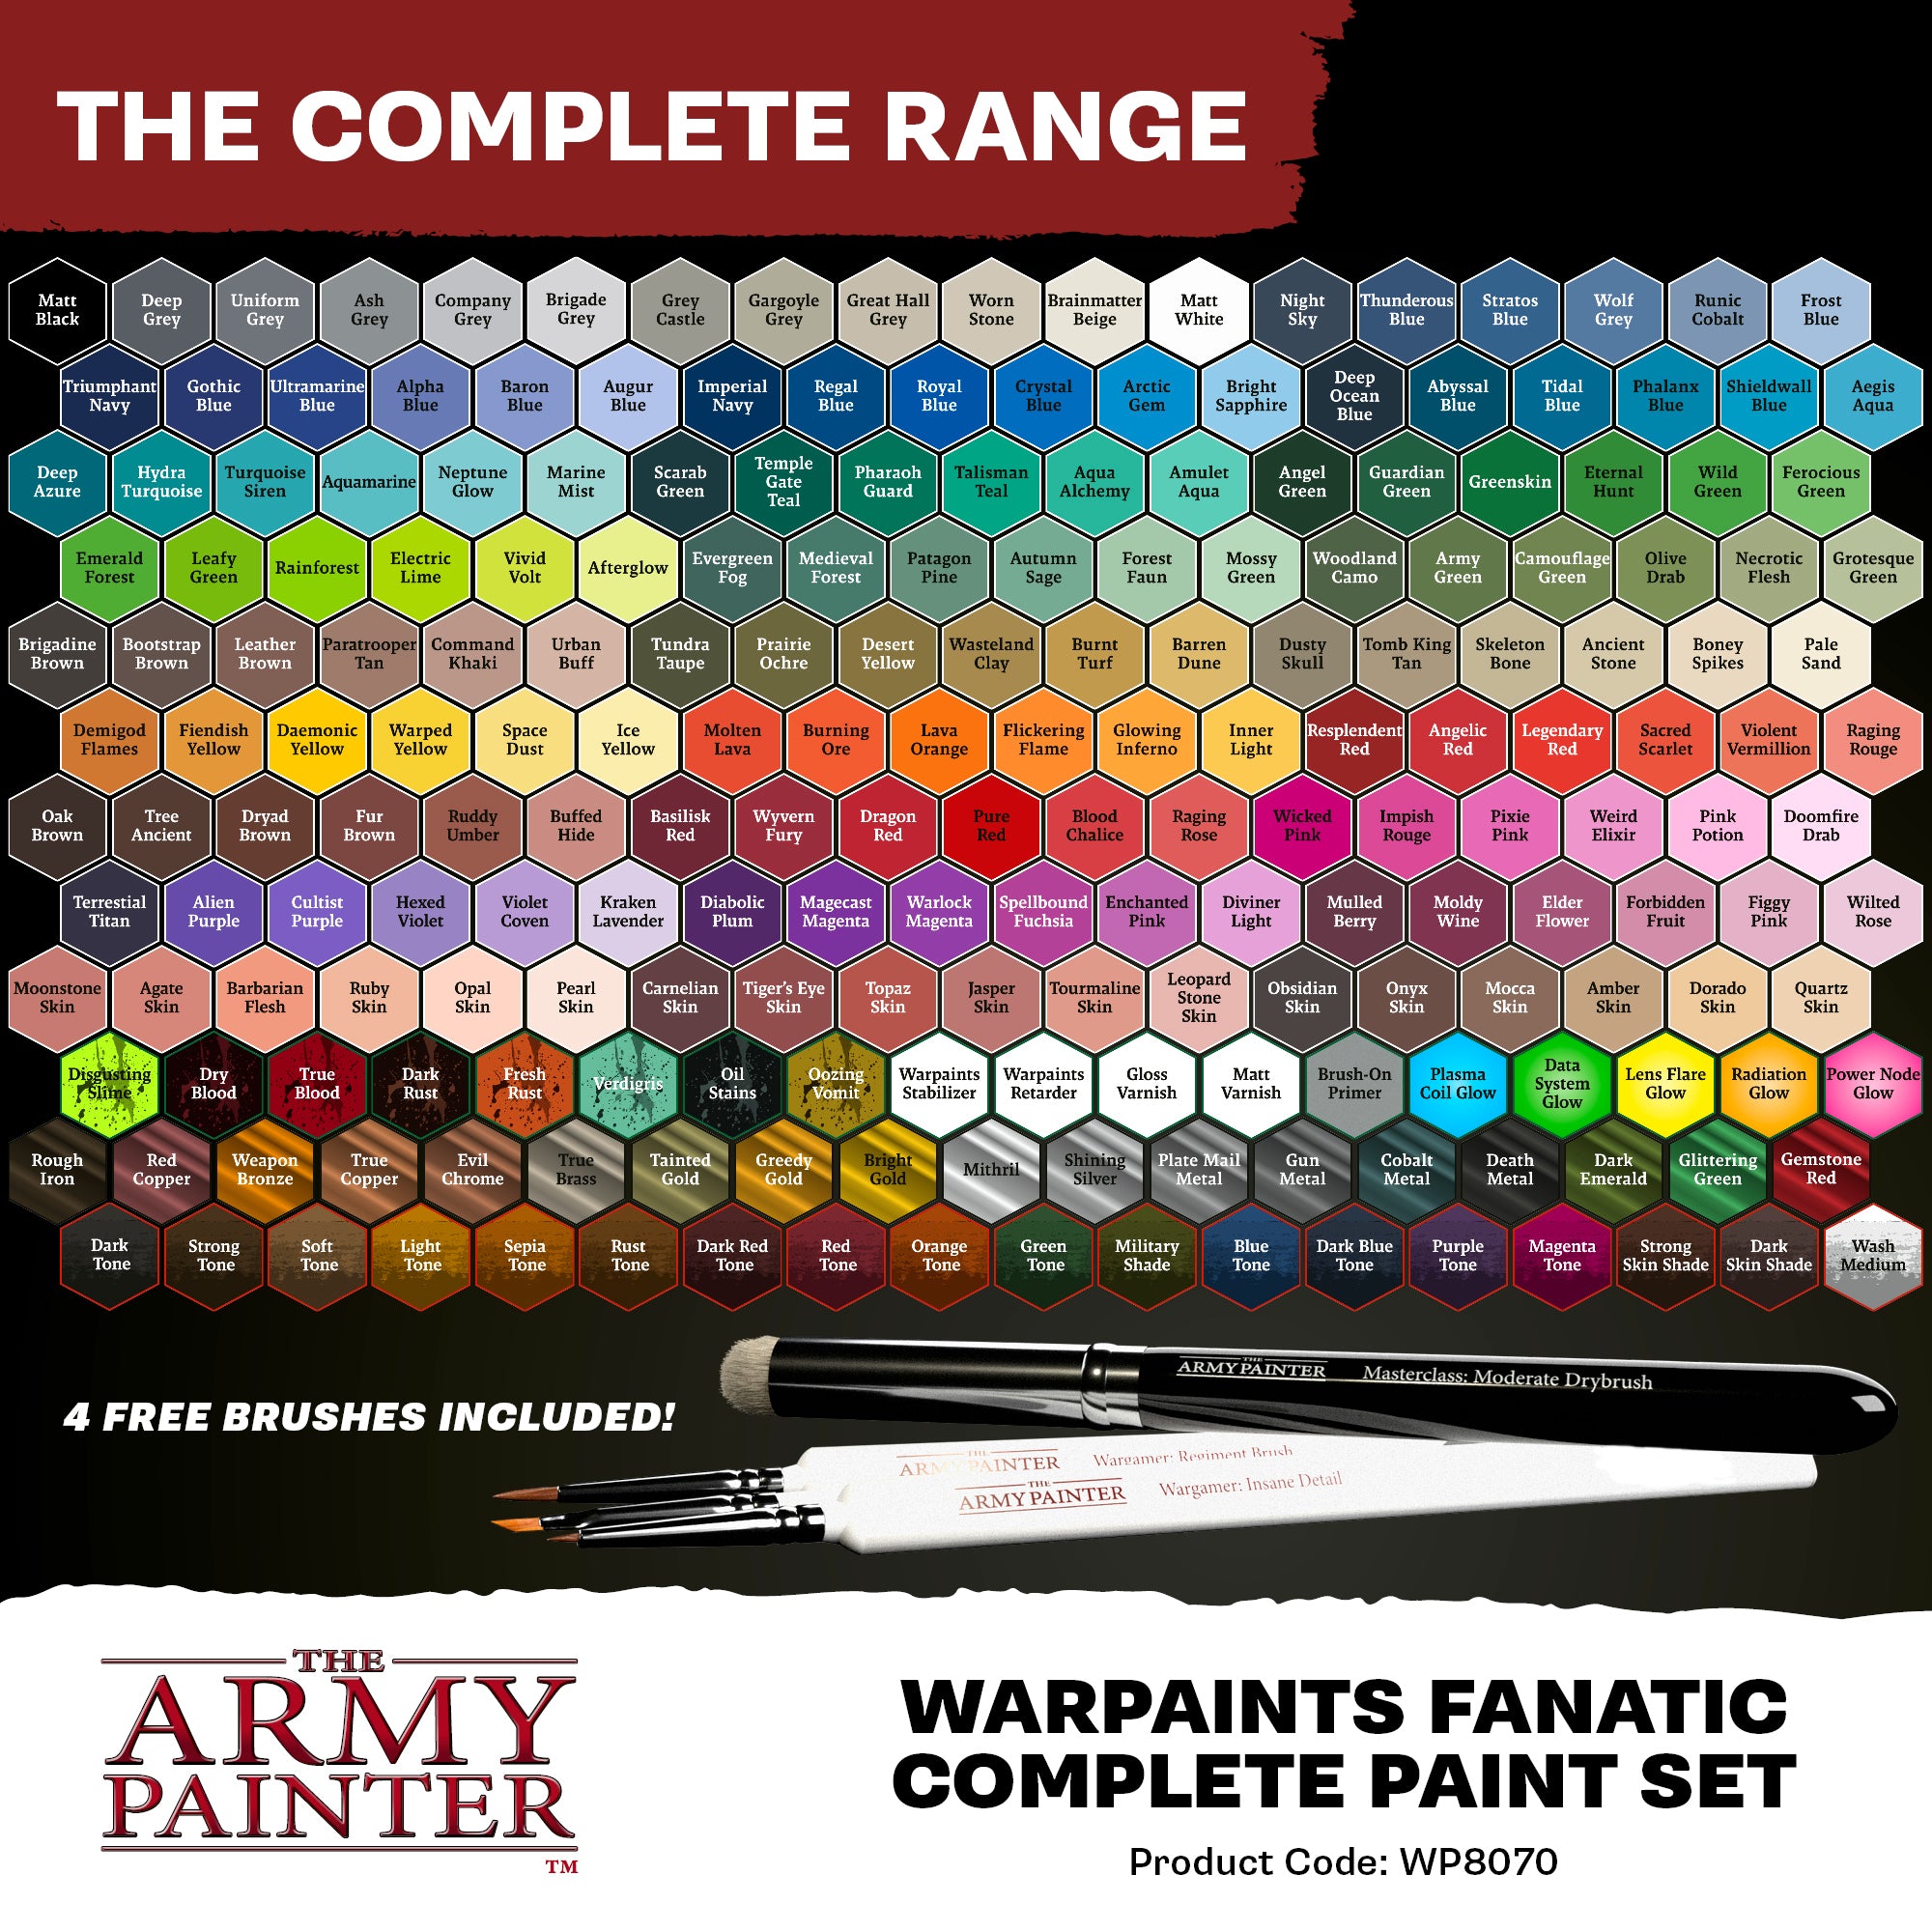 Warpaints Fanatic  WHEN and How Much? 